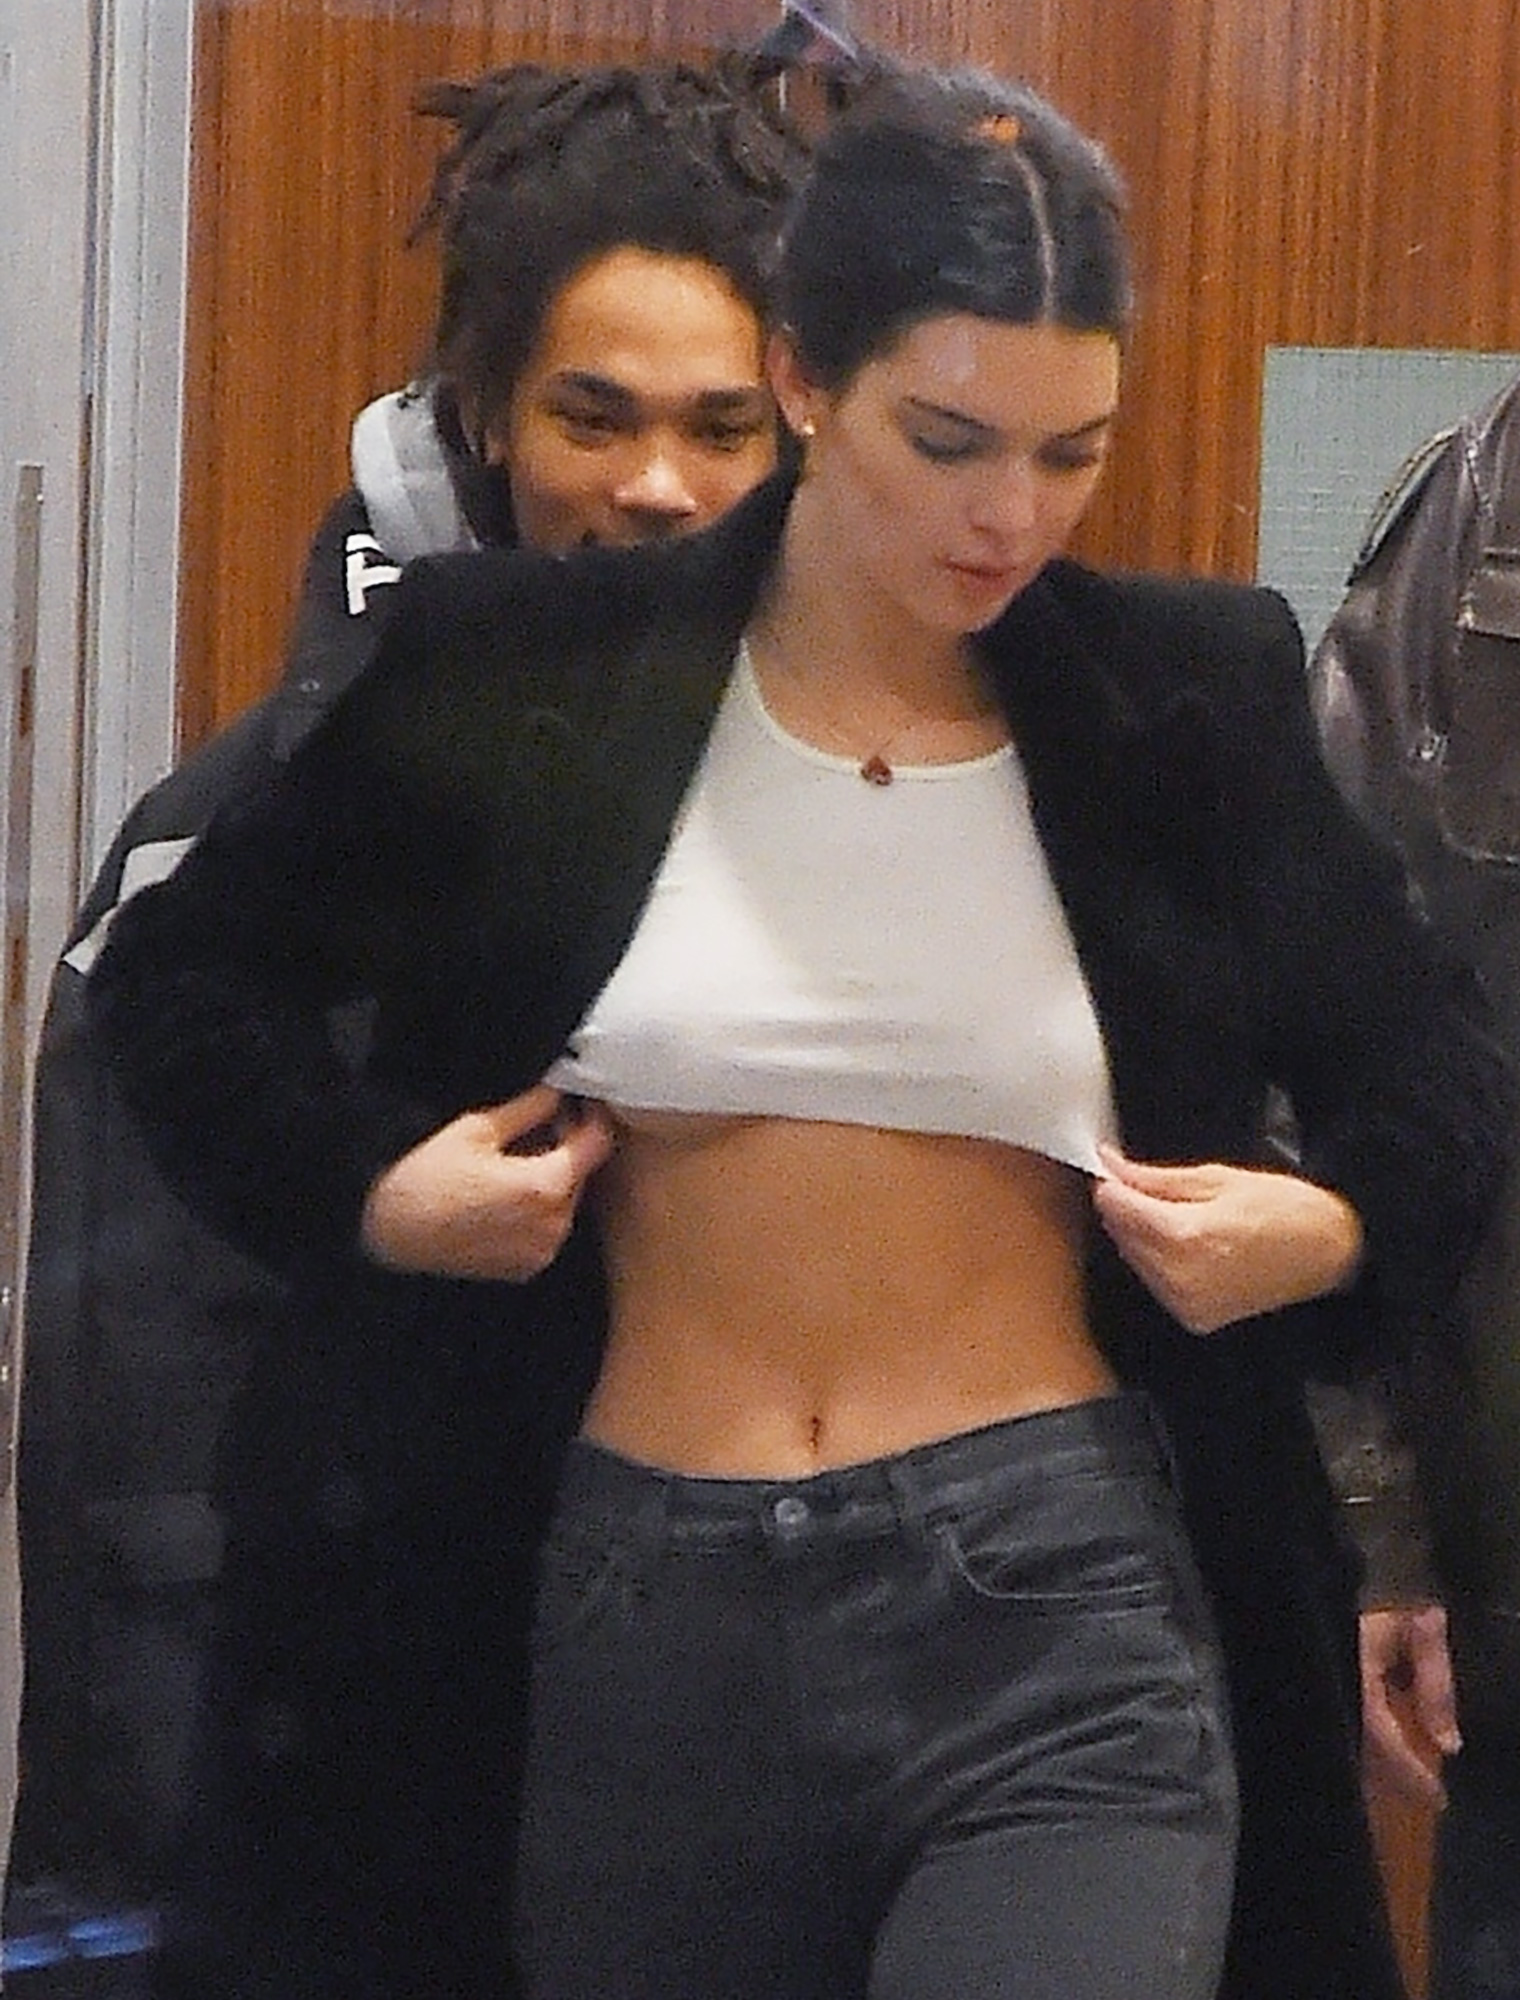 Kendall Jenner Makes a Fashionable Exit From Her NYC Hotel: Photo 3951096, Kendall Jenner Photos